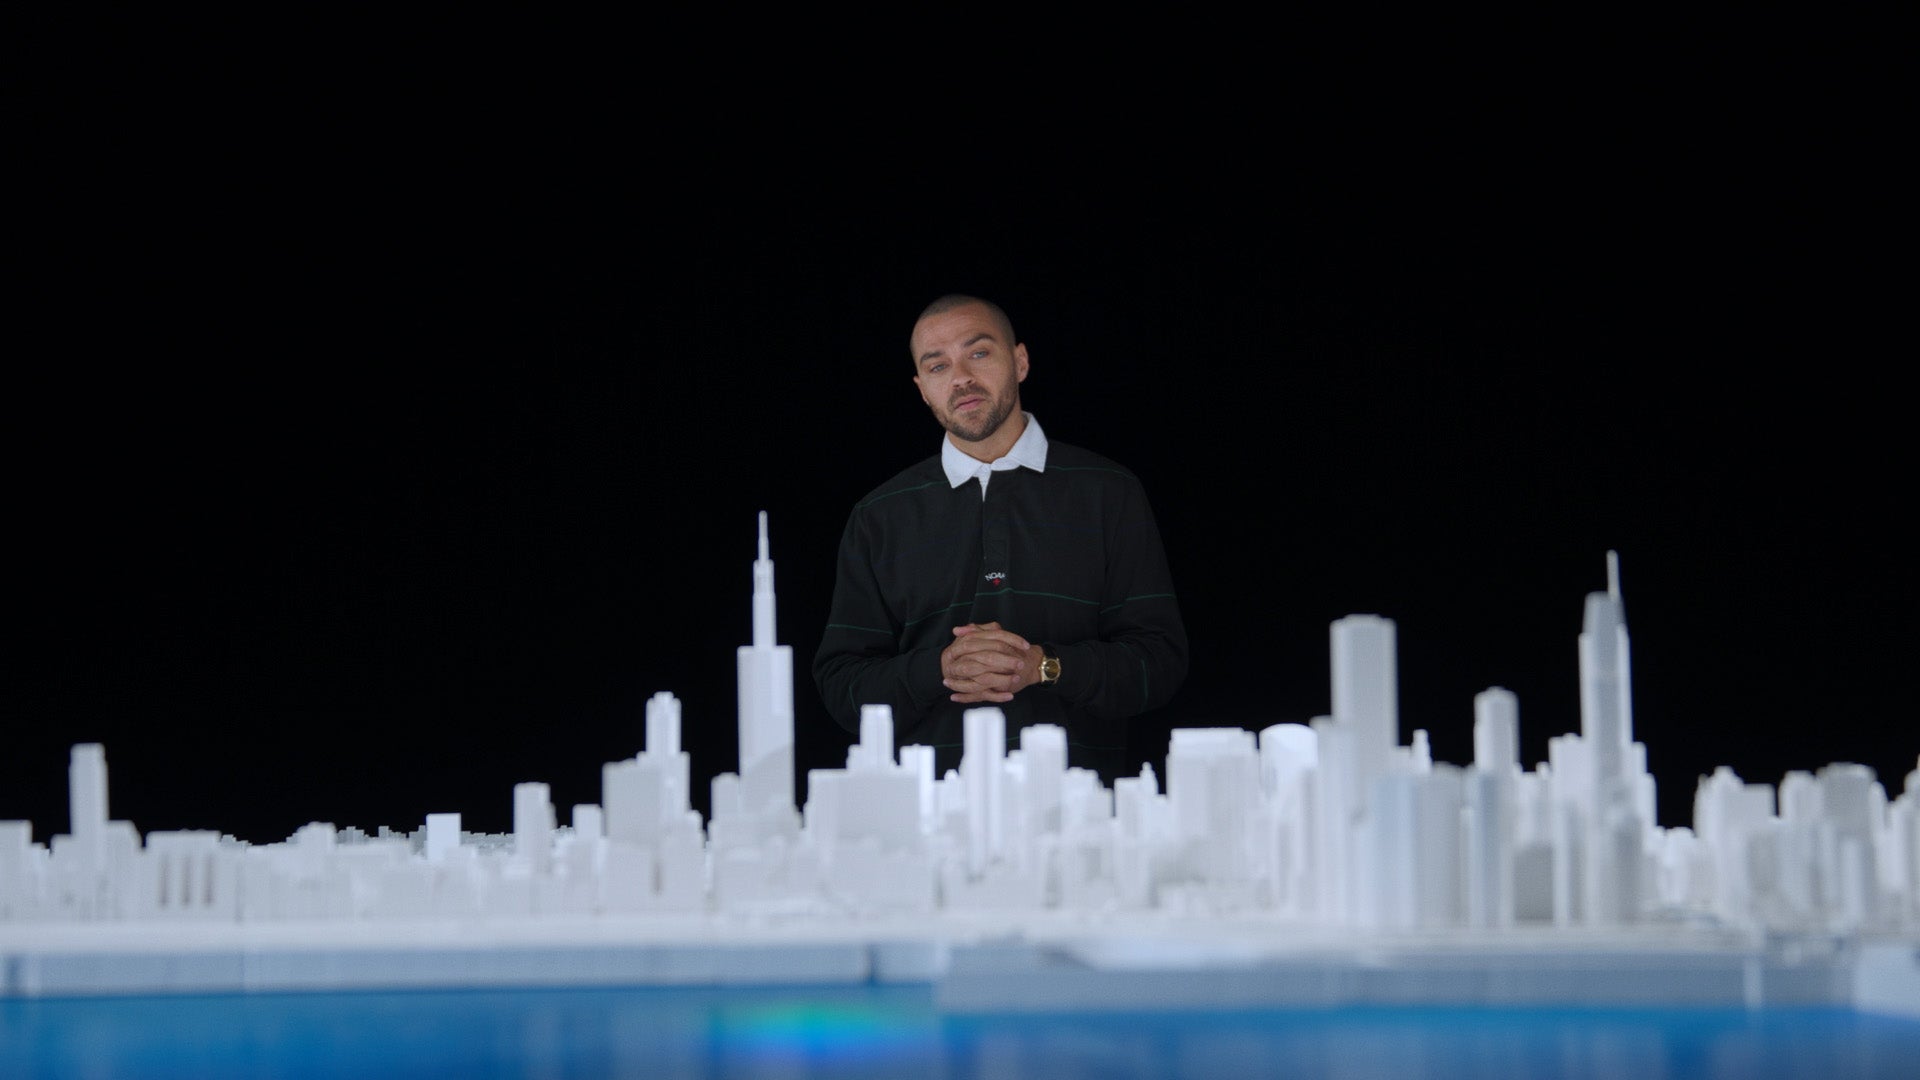 Jesse Williams with Microscape's 15 foot diameter circular model of Chicago